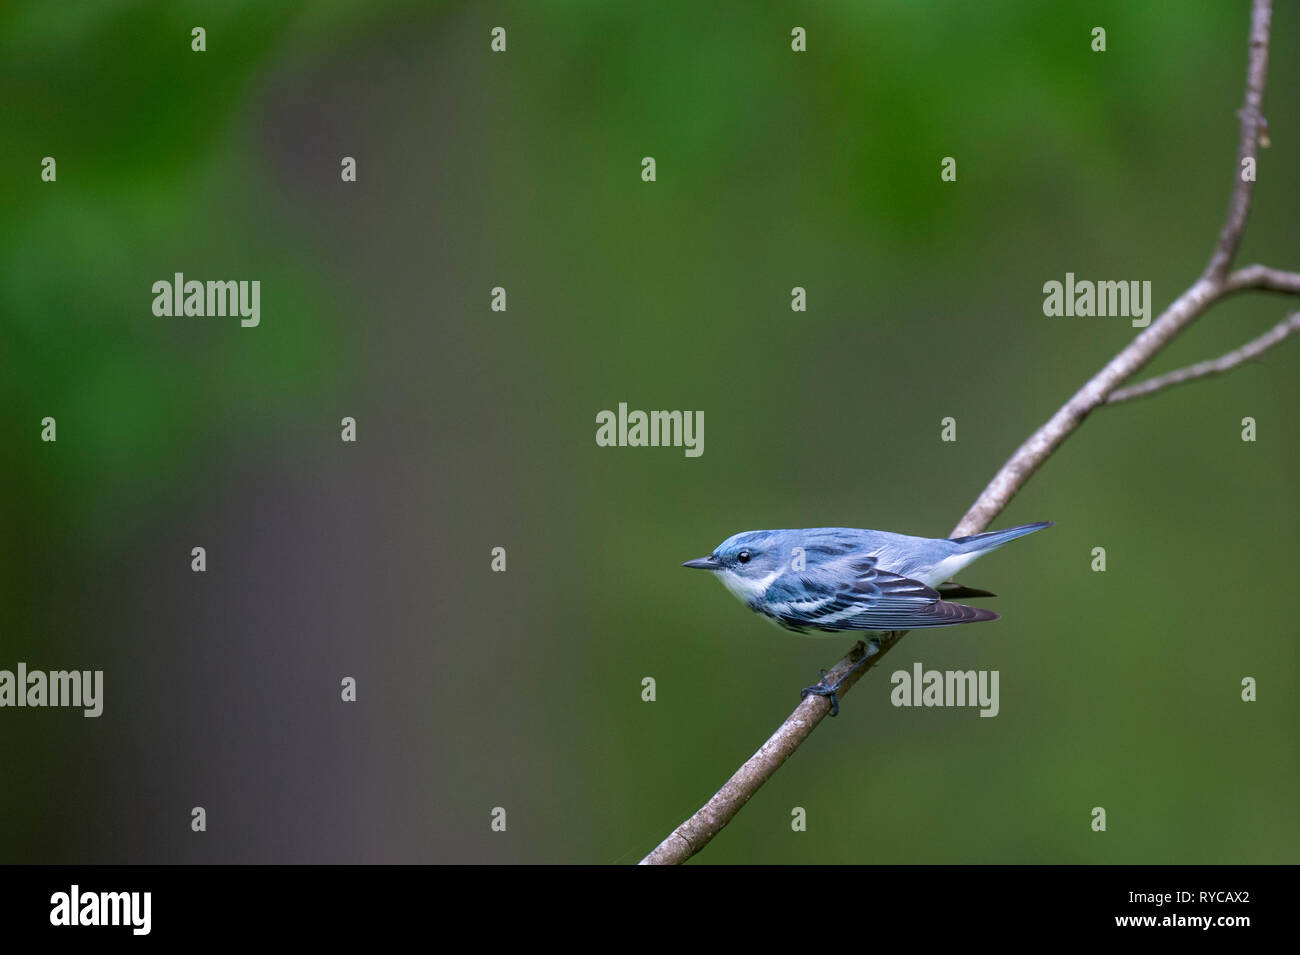 A vibrant blue colored Cerulean Warbler perched on a branch with its wings out in an aggressive posture. Stock Photo